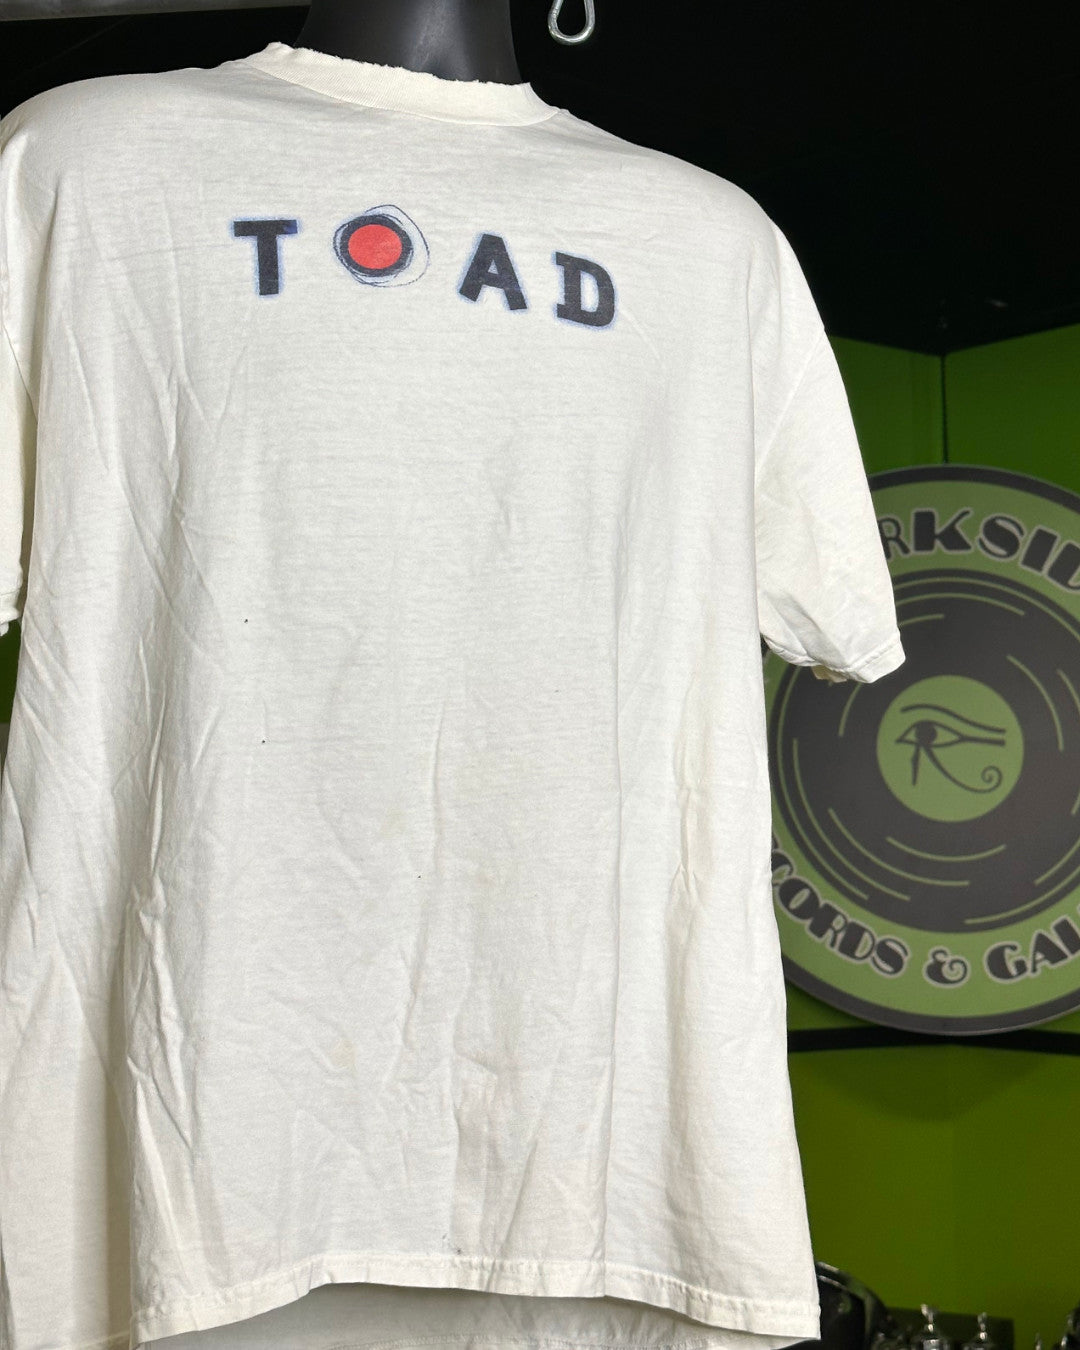 Toad The Wet Sprocket 1997 Tour T-Shirt, White, XL - Darkside Records